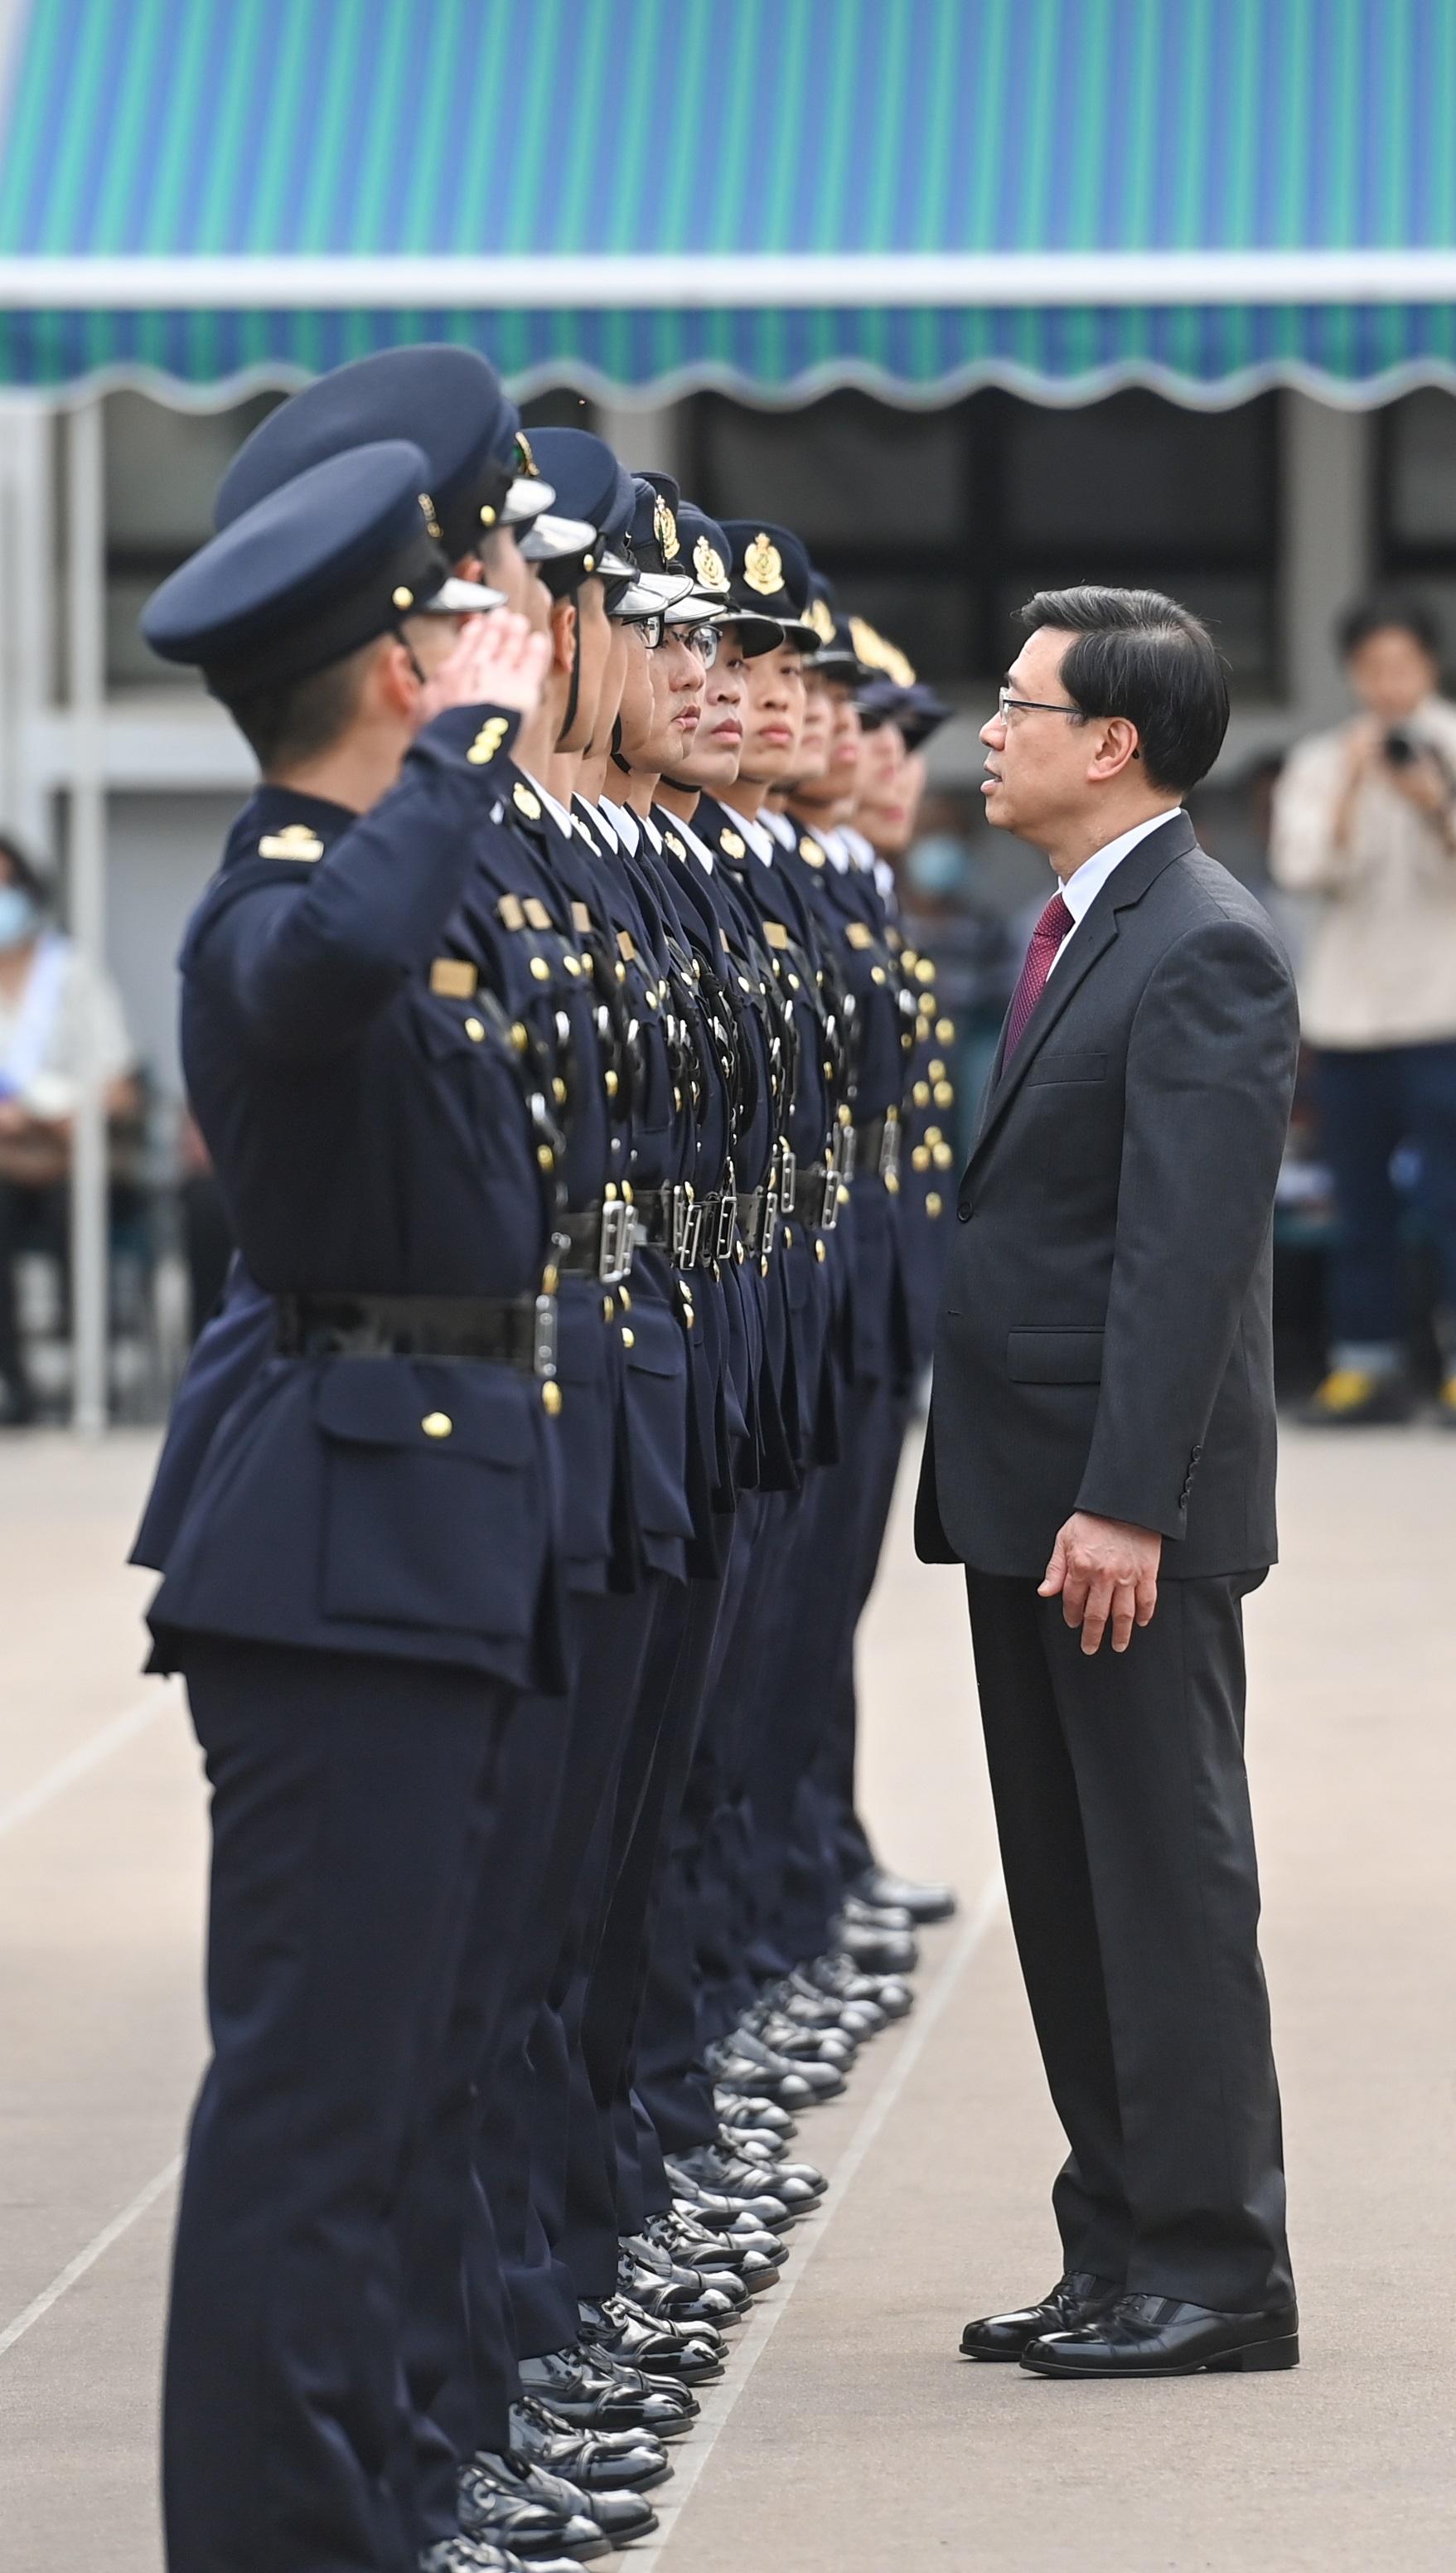 The Chief Executive, Mr John Lee, inspects passing-out officers at the Hong Kong Customs Passing-out Parade today (March 24).